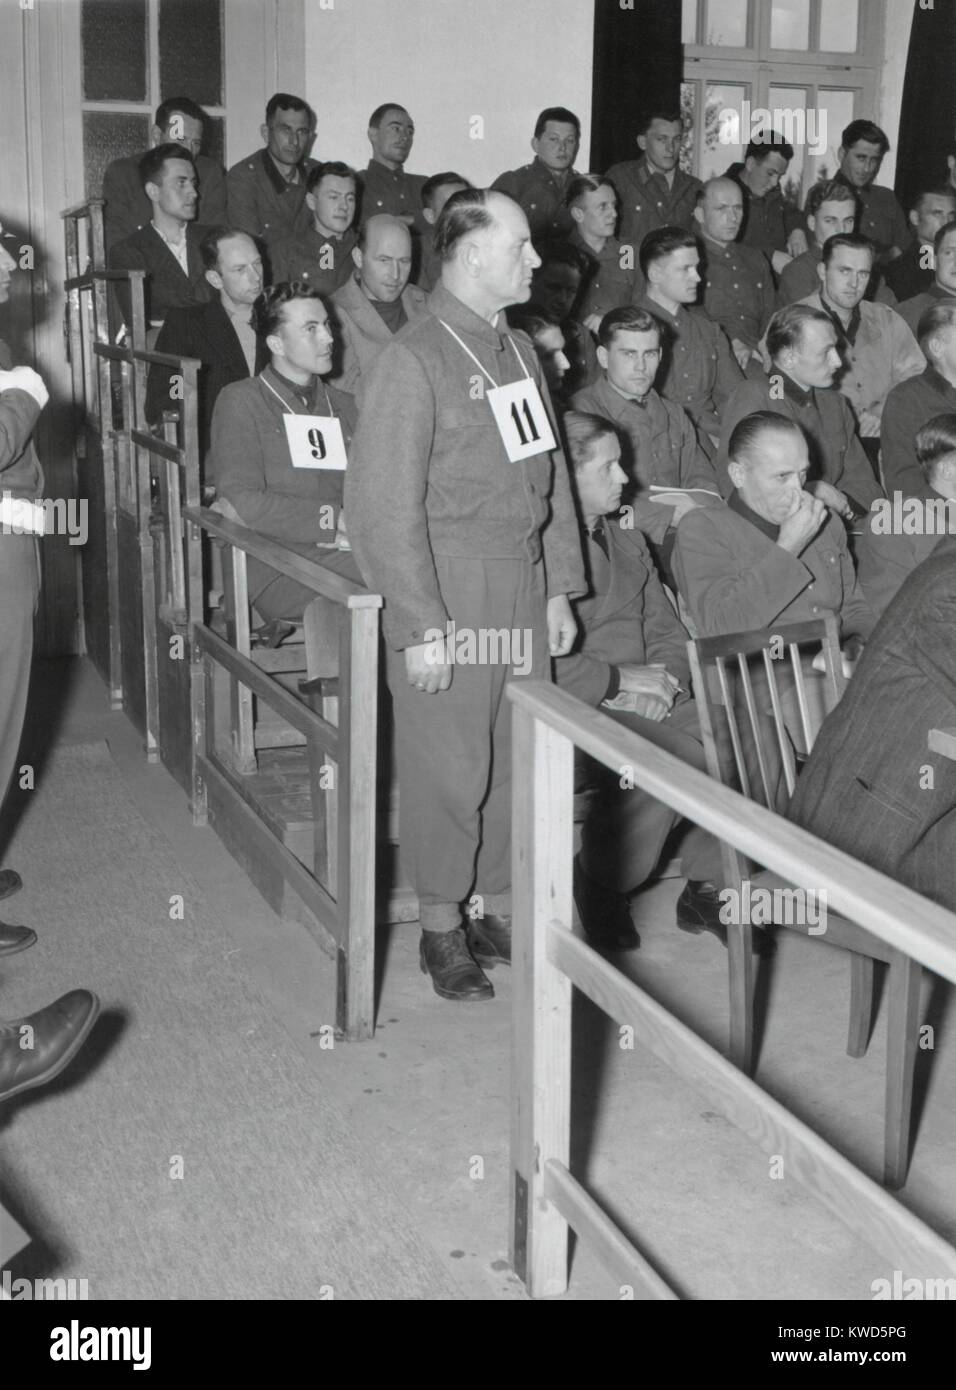 Josep Dietrich, Commander of the 6th Nazi SS Panzer Army, on trial for Malmedy Massacre. Standing with #11 hanging around his neck, he was the highest ranking of the 73 defendants. May 16, 1946. (BSLOC 2014 13 5) Stock Photo